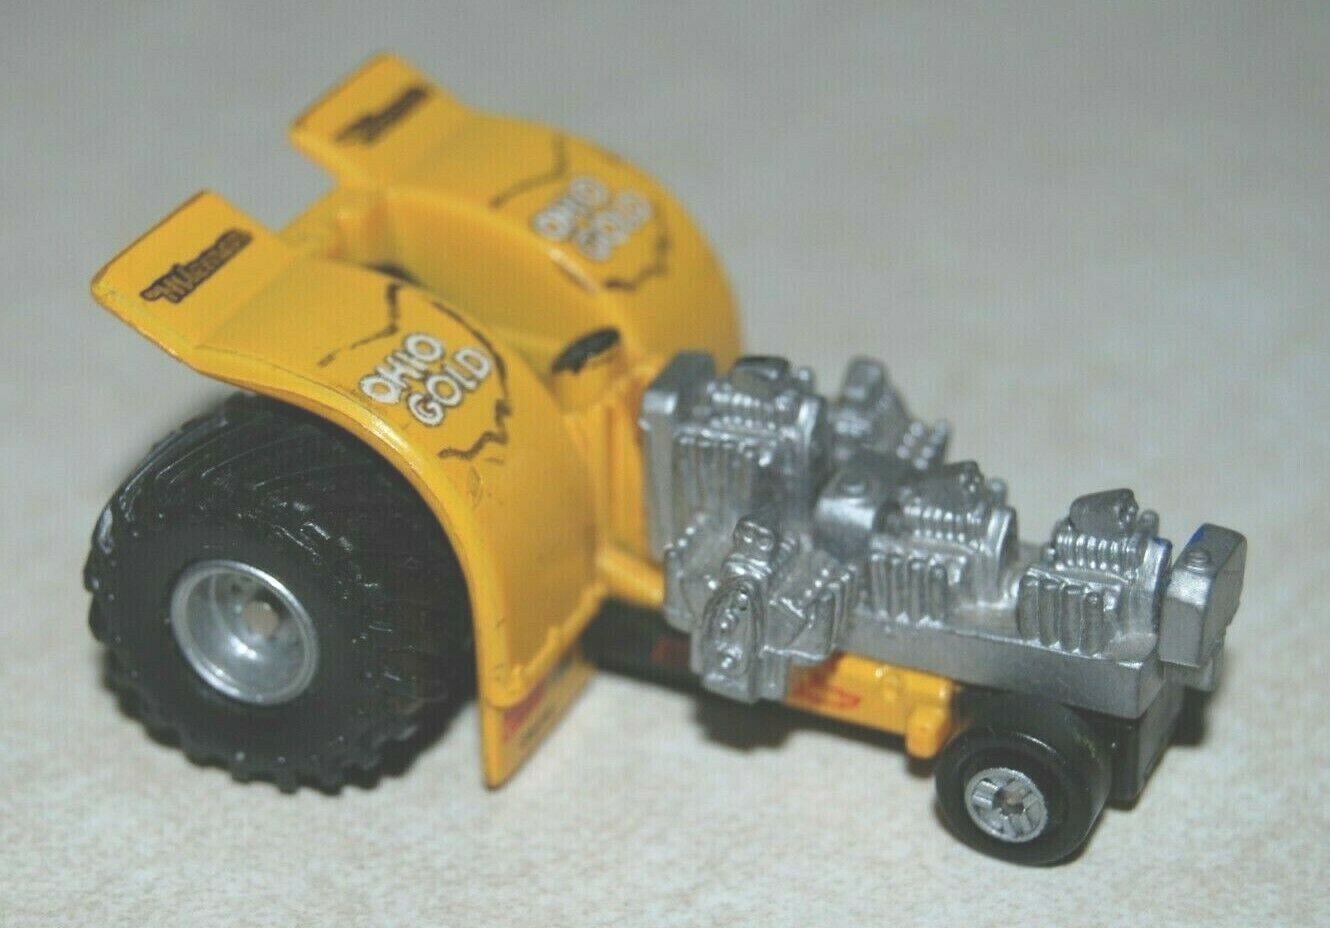 Micro Machines Tractor Puller Ohio Gold, 1990 Galoob Toy